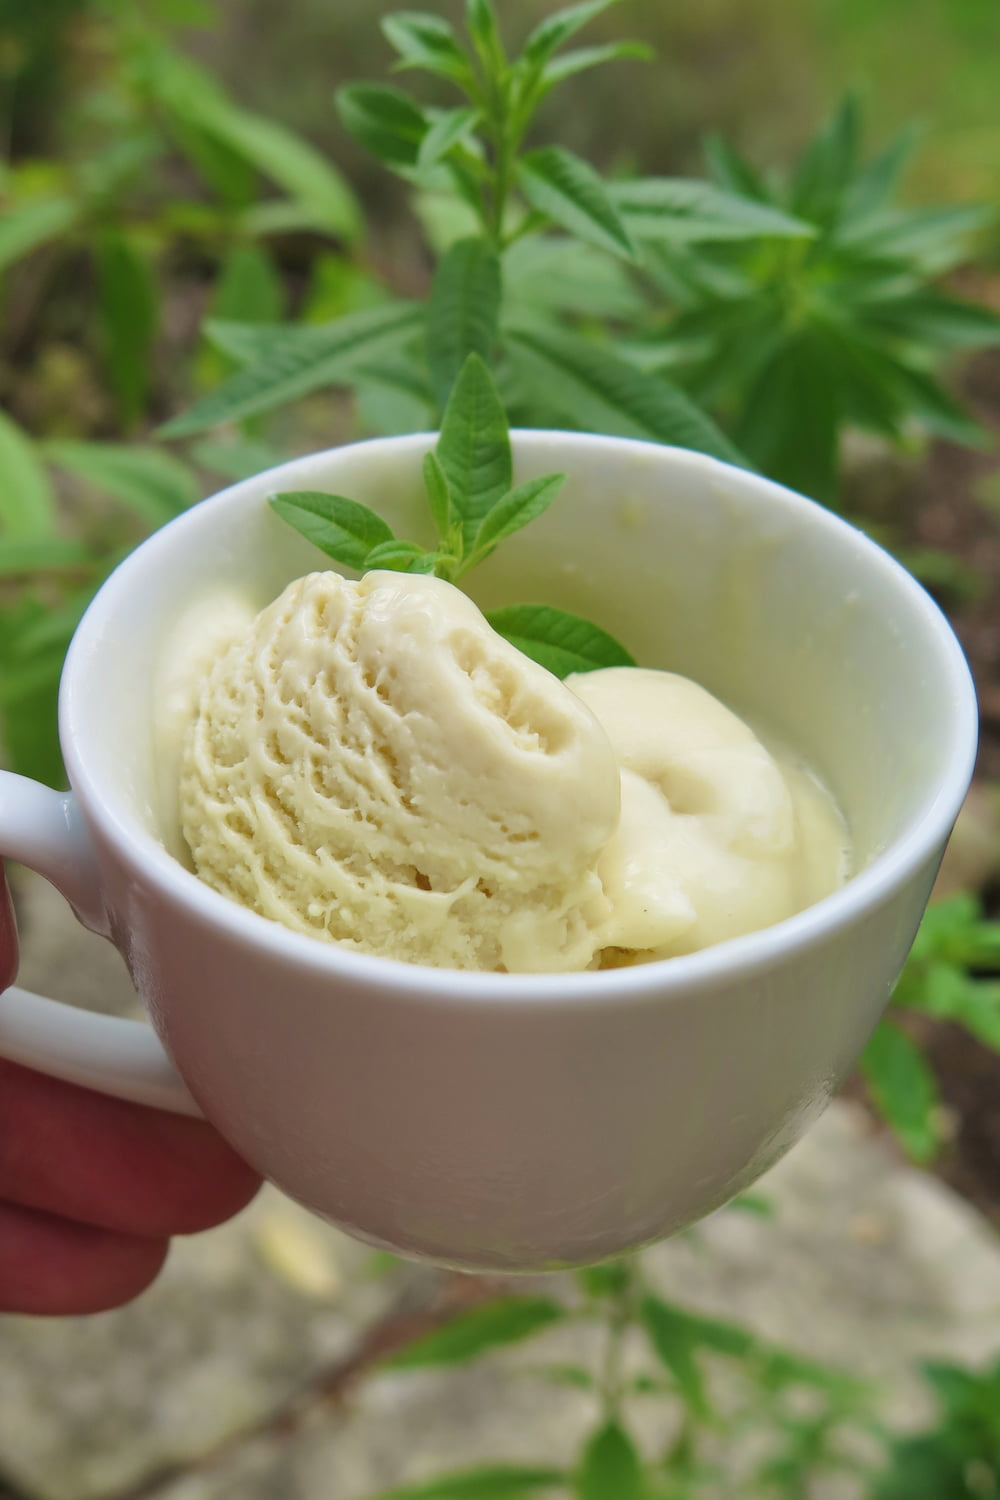 cup of light green melting ice cream with a sprig of lemon verbena leaves